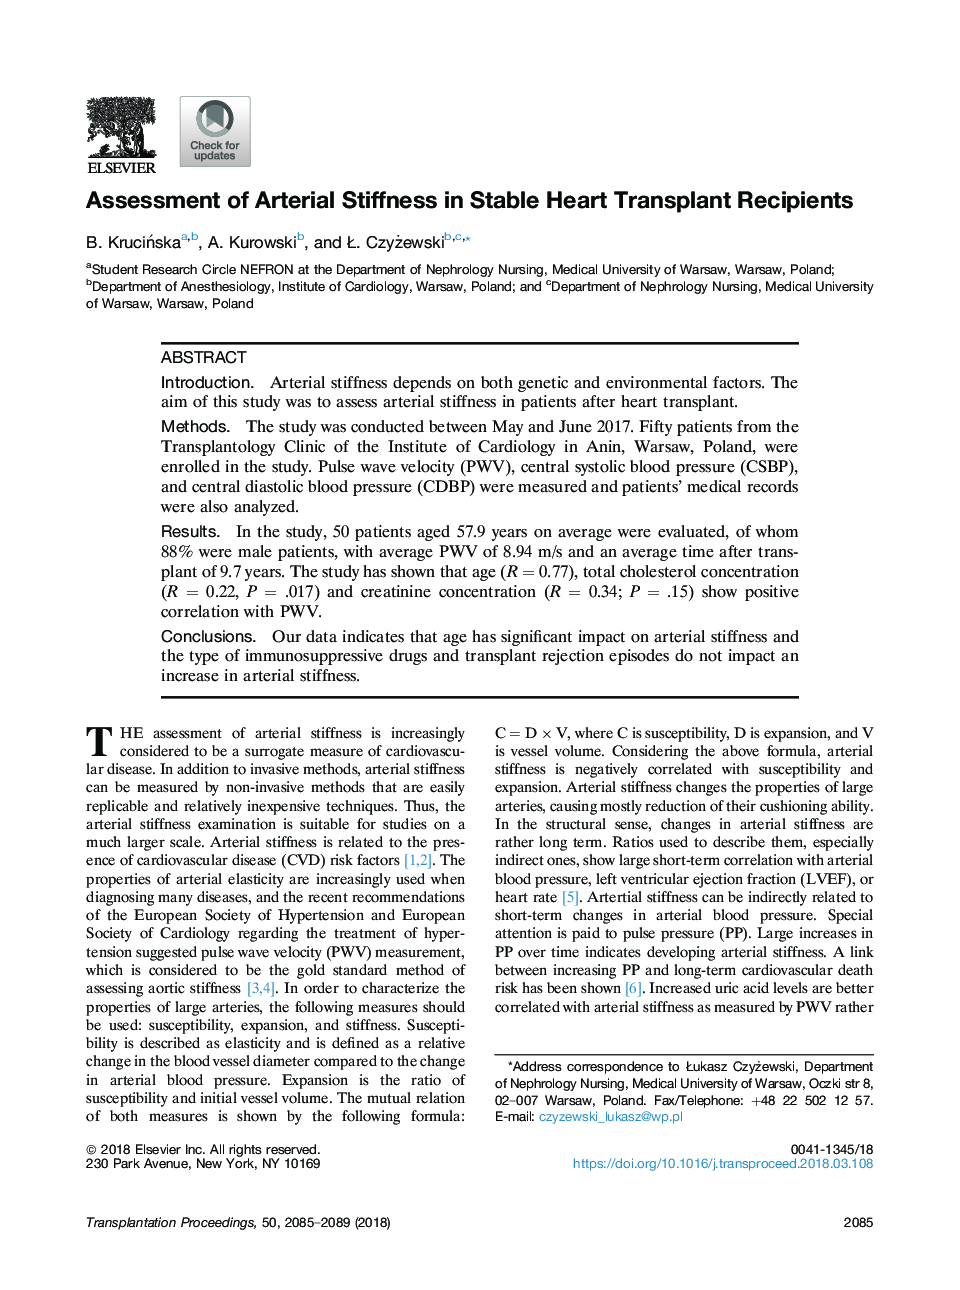 Assessment of Arterial Stiffness in Stable Heart Transplant Recipients